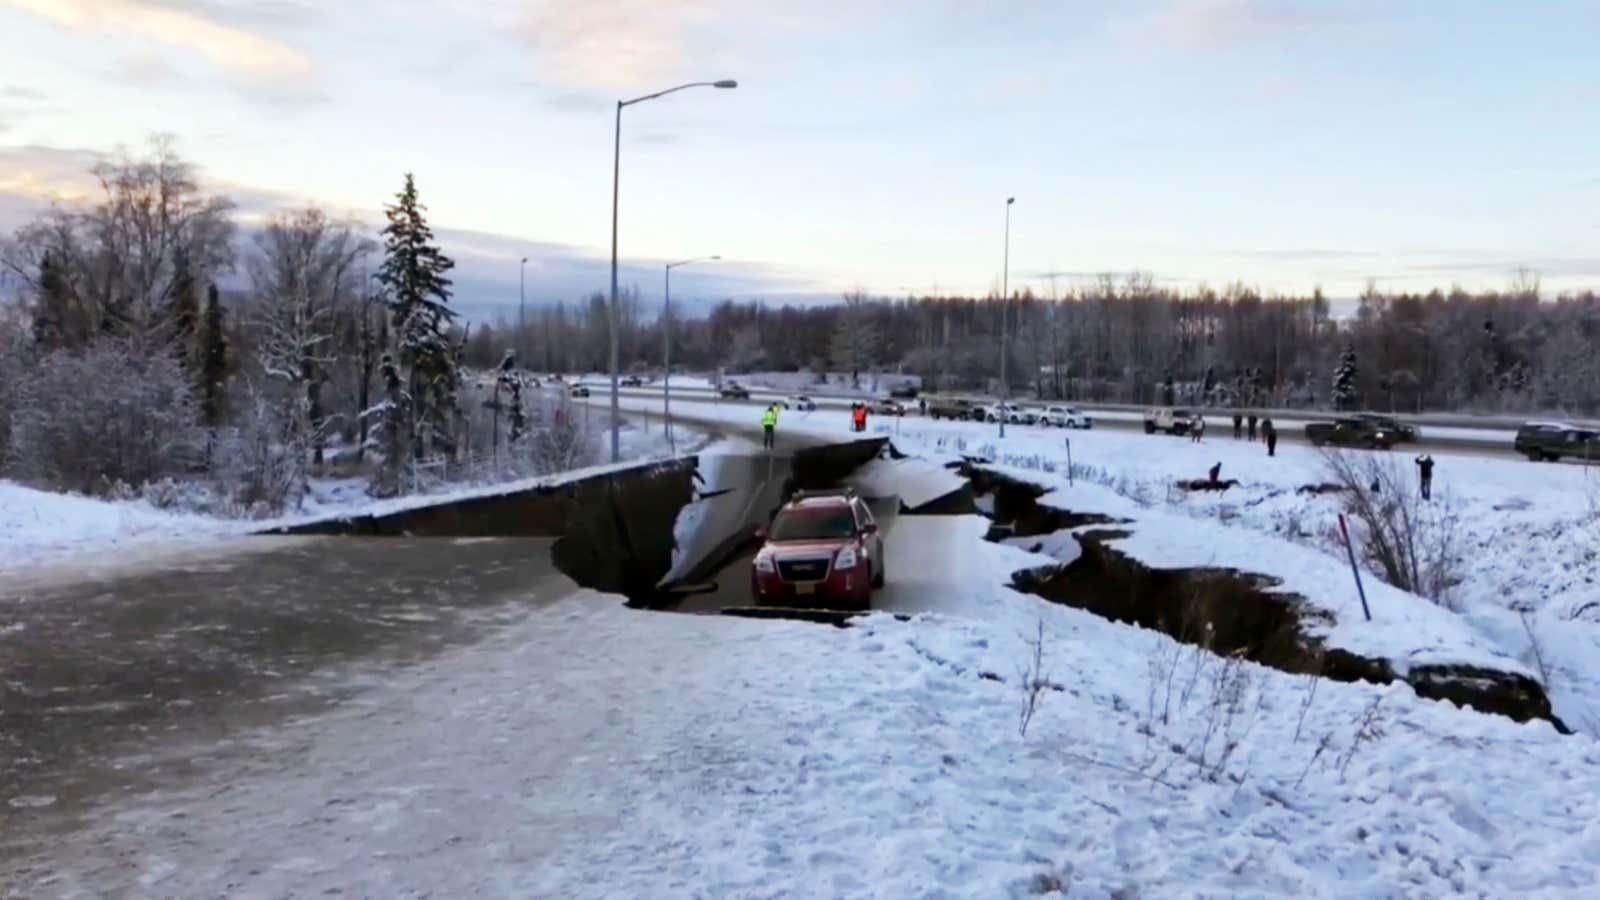 A car is trapped on a collapsed section of the offramp in Anchorage, Friday, Nov. 30, 2018. Back-to-back earthquakes measuring 7.0 and 5.8 rocked buildings and buckled roads Friday morning in Anchorage, prompting people to run from their offices or seek shelter under office desks, while a tsunami warning had some seeking higher ground. (AP Photo